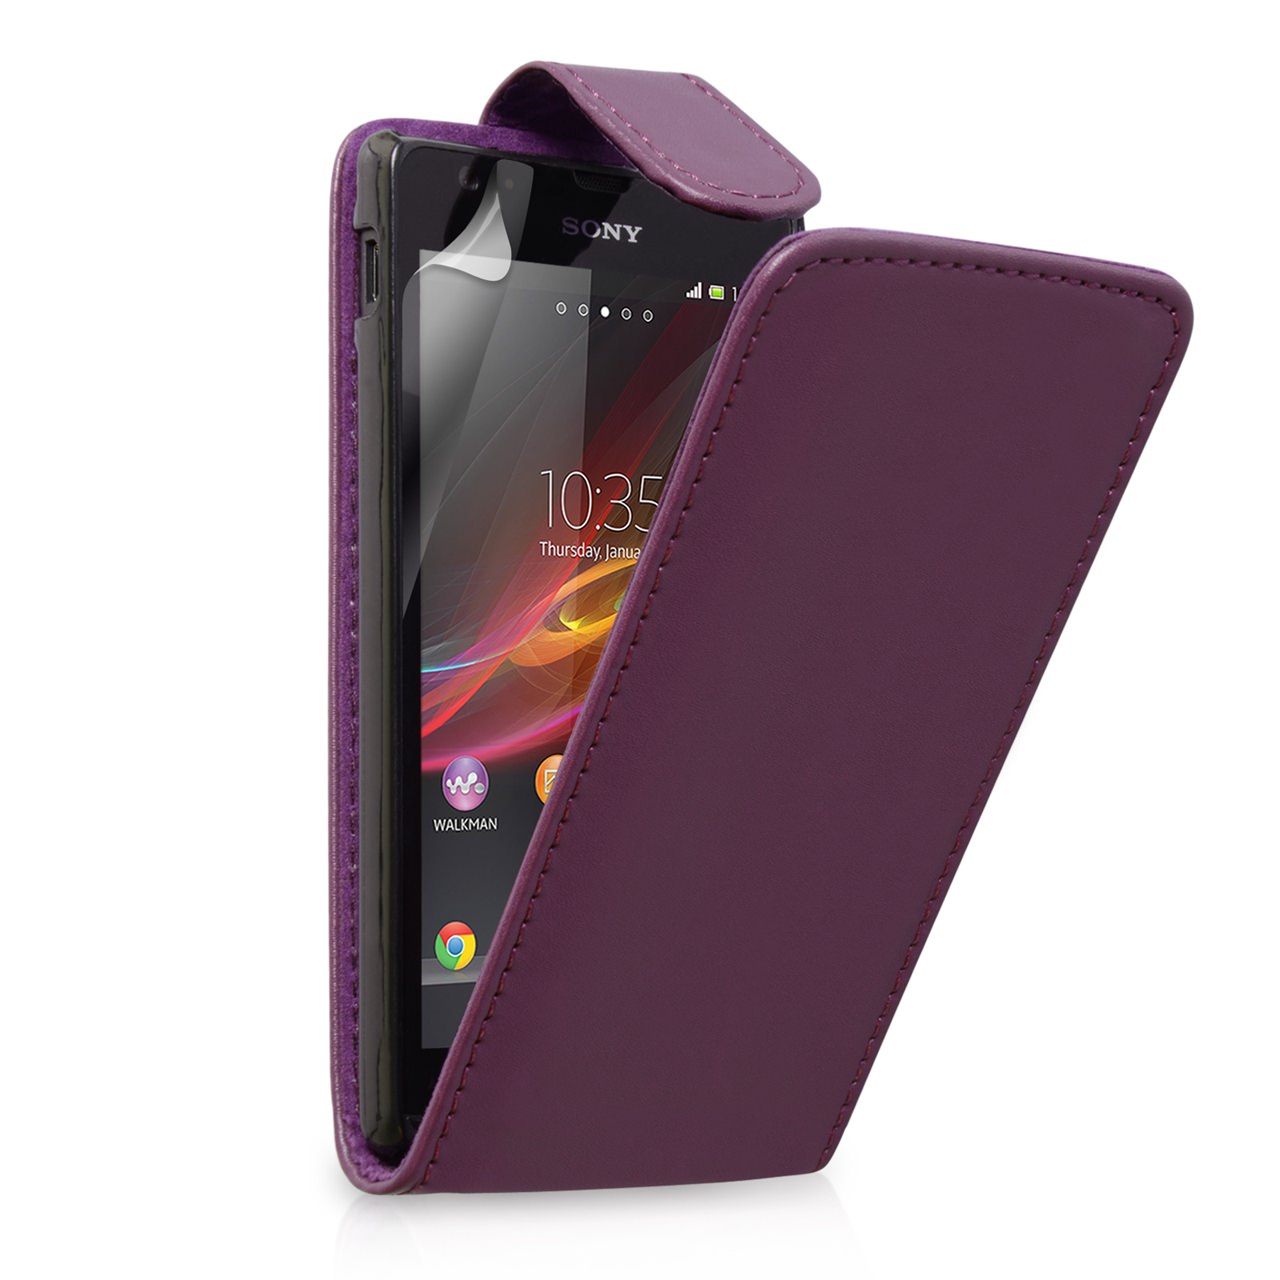 YouSave Accessories Sony Xperia SP Leather-Effect Flip Case - Purple